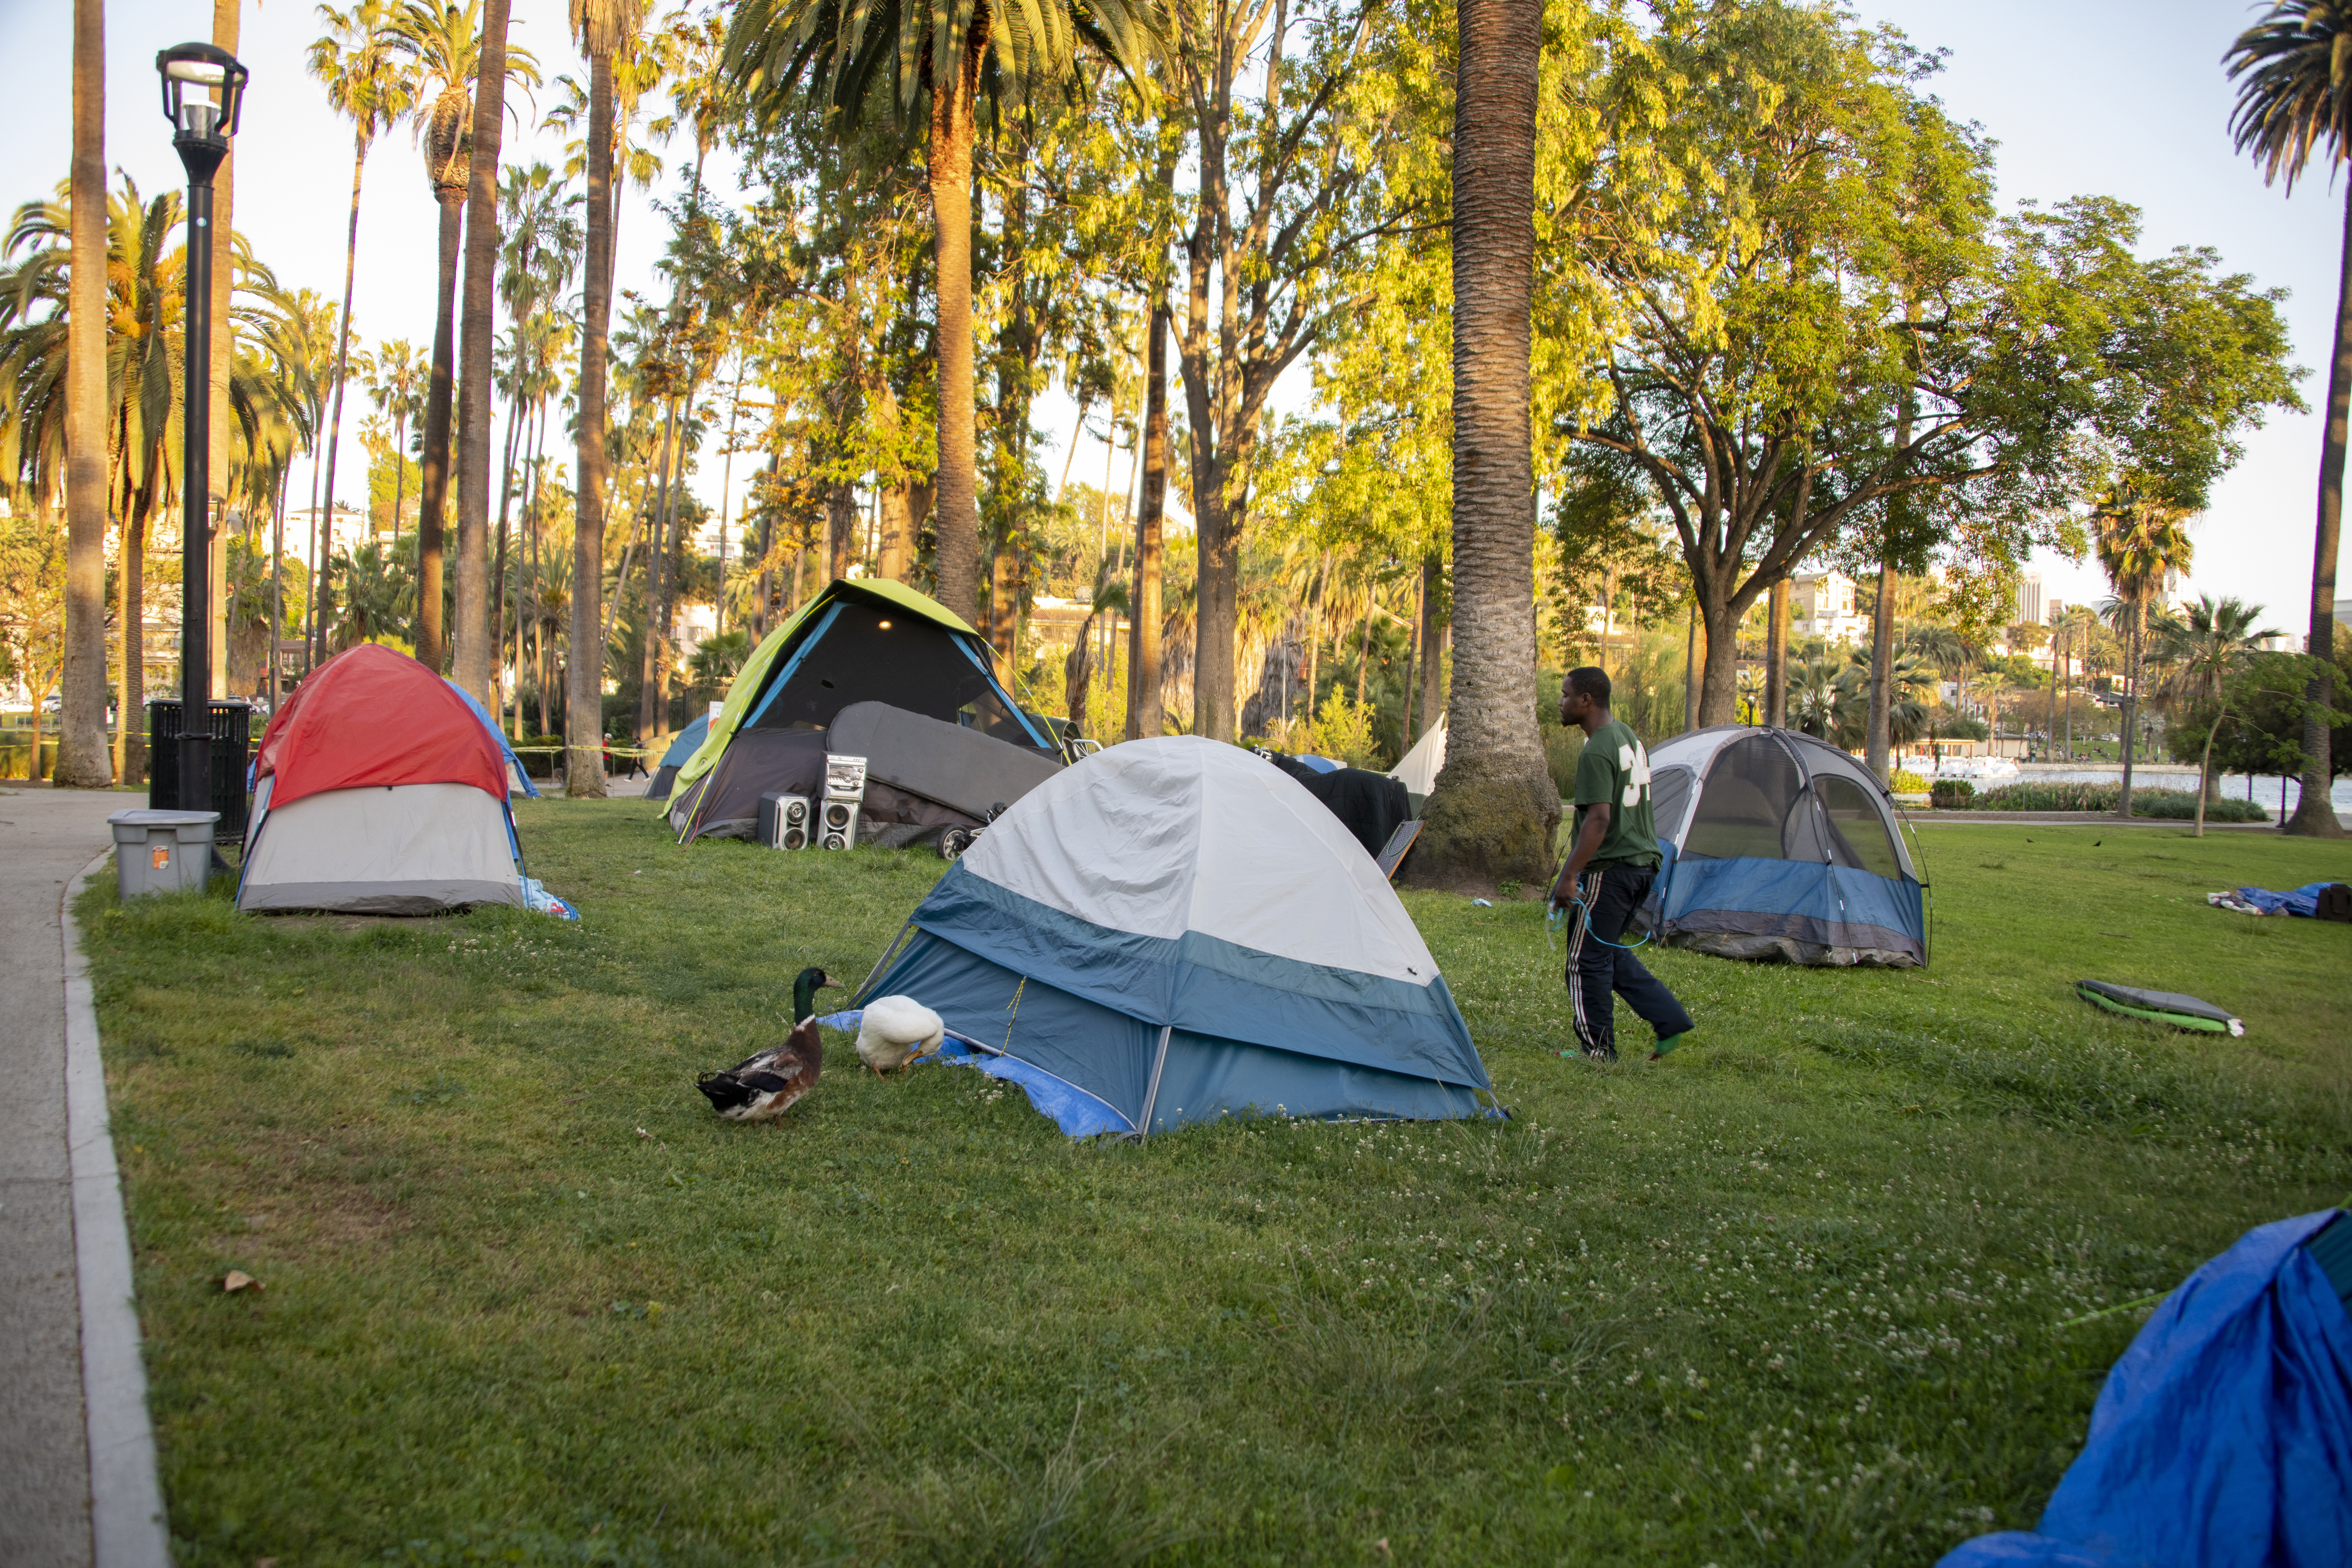 Echo Park Lake: Tall fences and no more homeless camps. Where are the  former residents now?